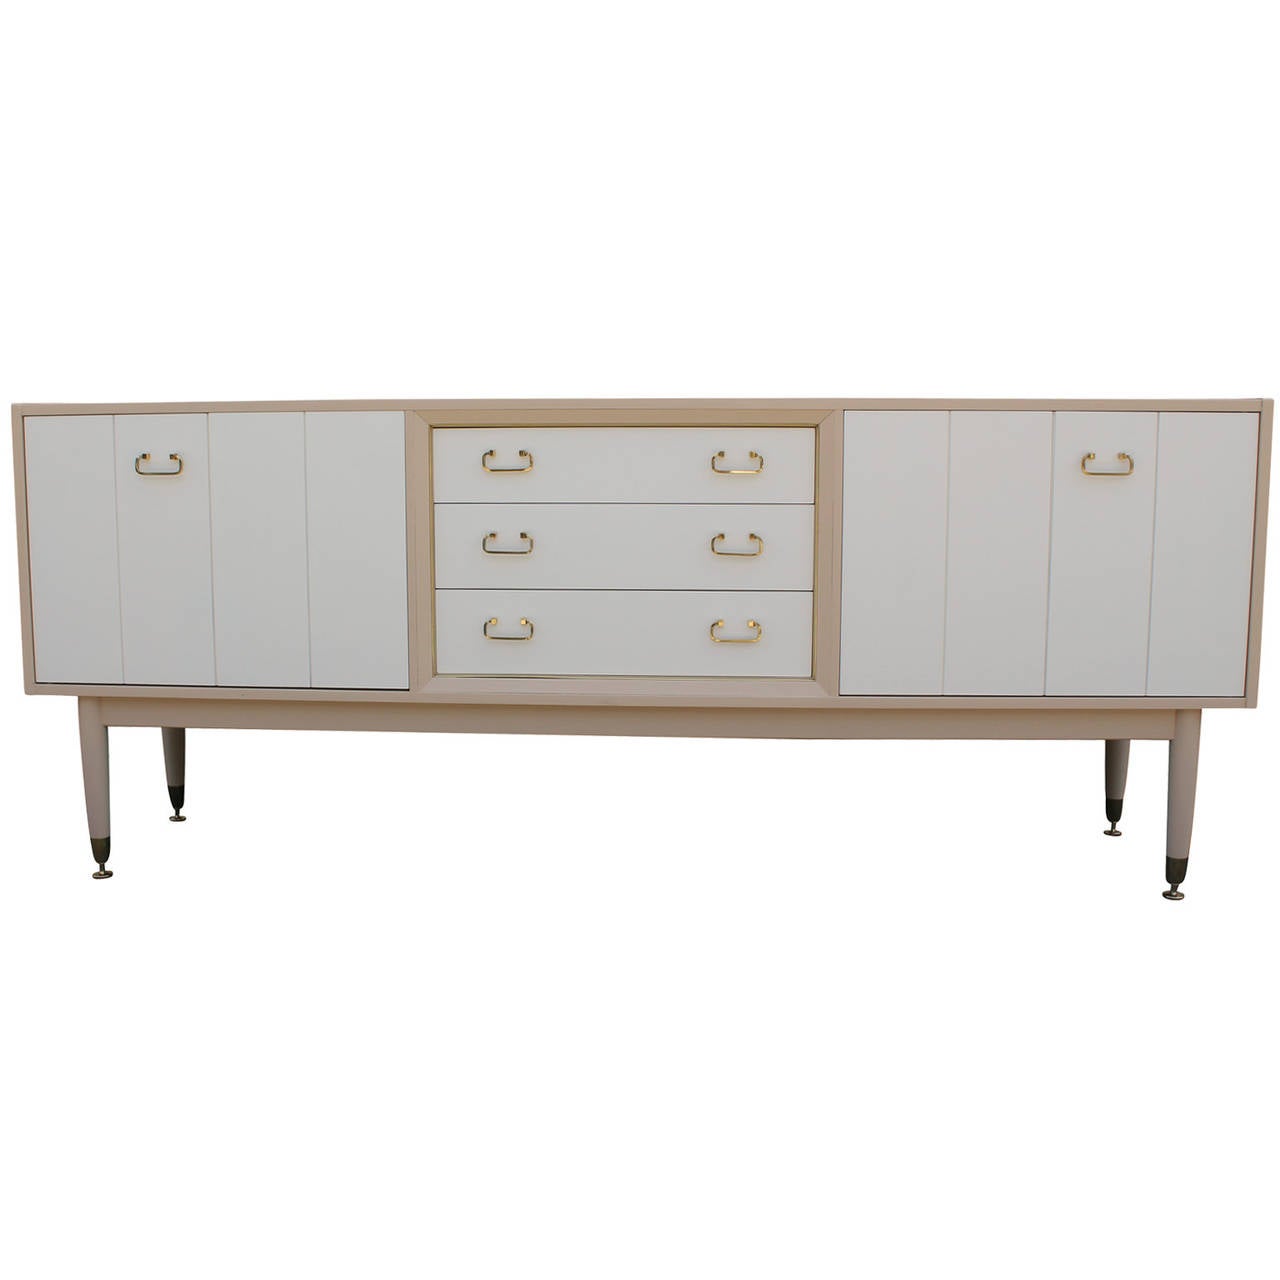 Stunning khaki and cream lacquered sideboard or credenza with brass handles and folding doors. Sideboard is restored superbly. Adjustable brass feet have been polished along with all hinges. Excellent piece of furniture.